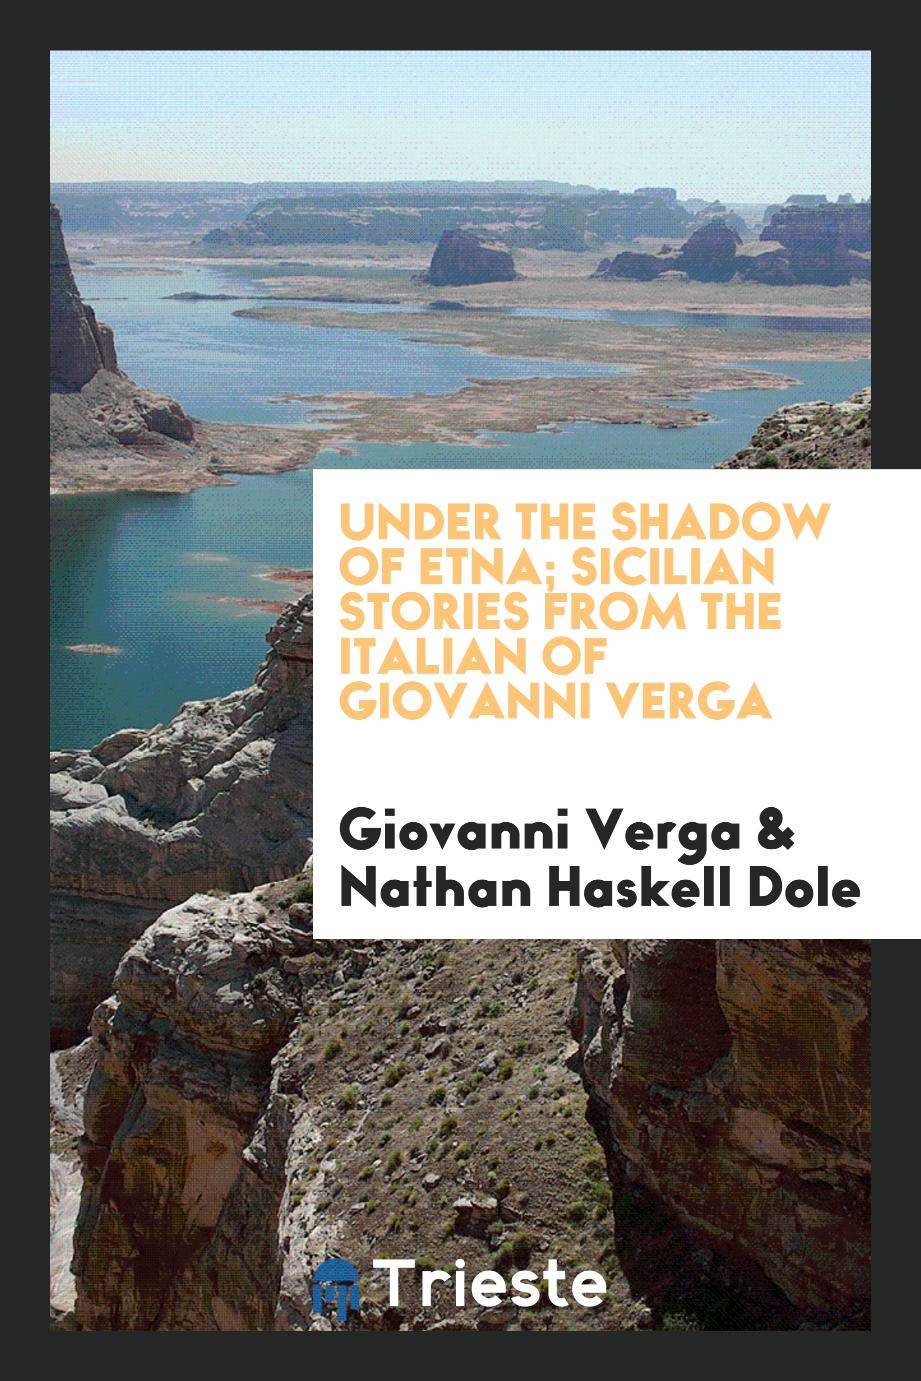 Under the shadow of Etna; Sicilian stories from the Italian of Giovanni Verga